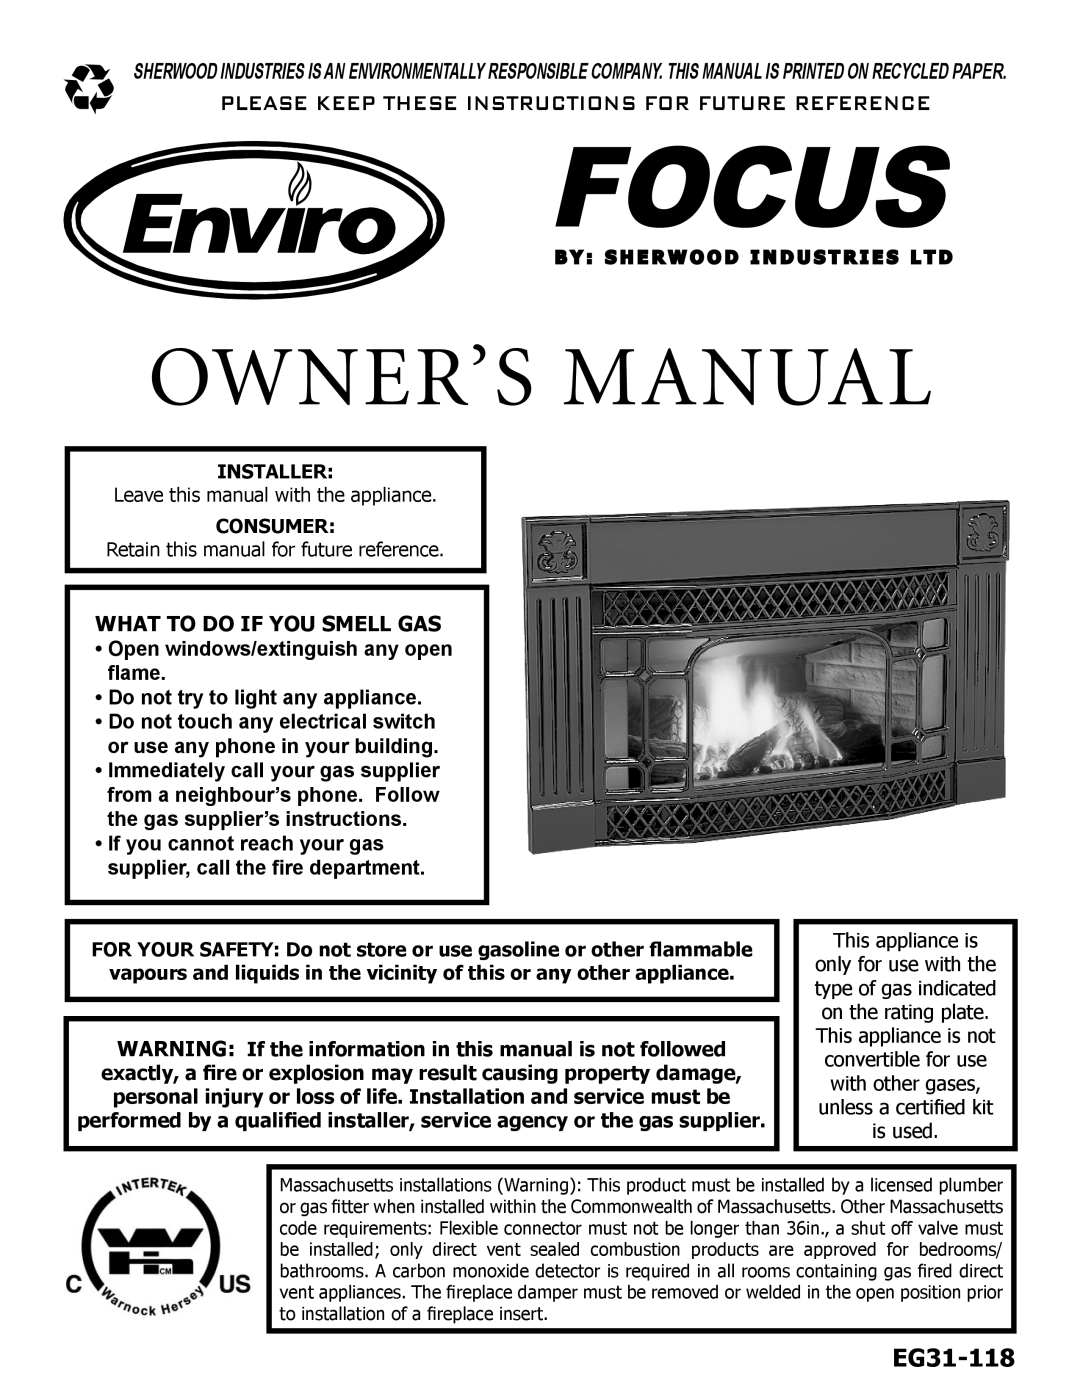 Enviro C-11288 owner manual What To Do If You Smell Gas, Installer, Consumer, Focus, EG31-118 